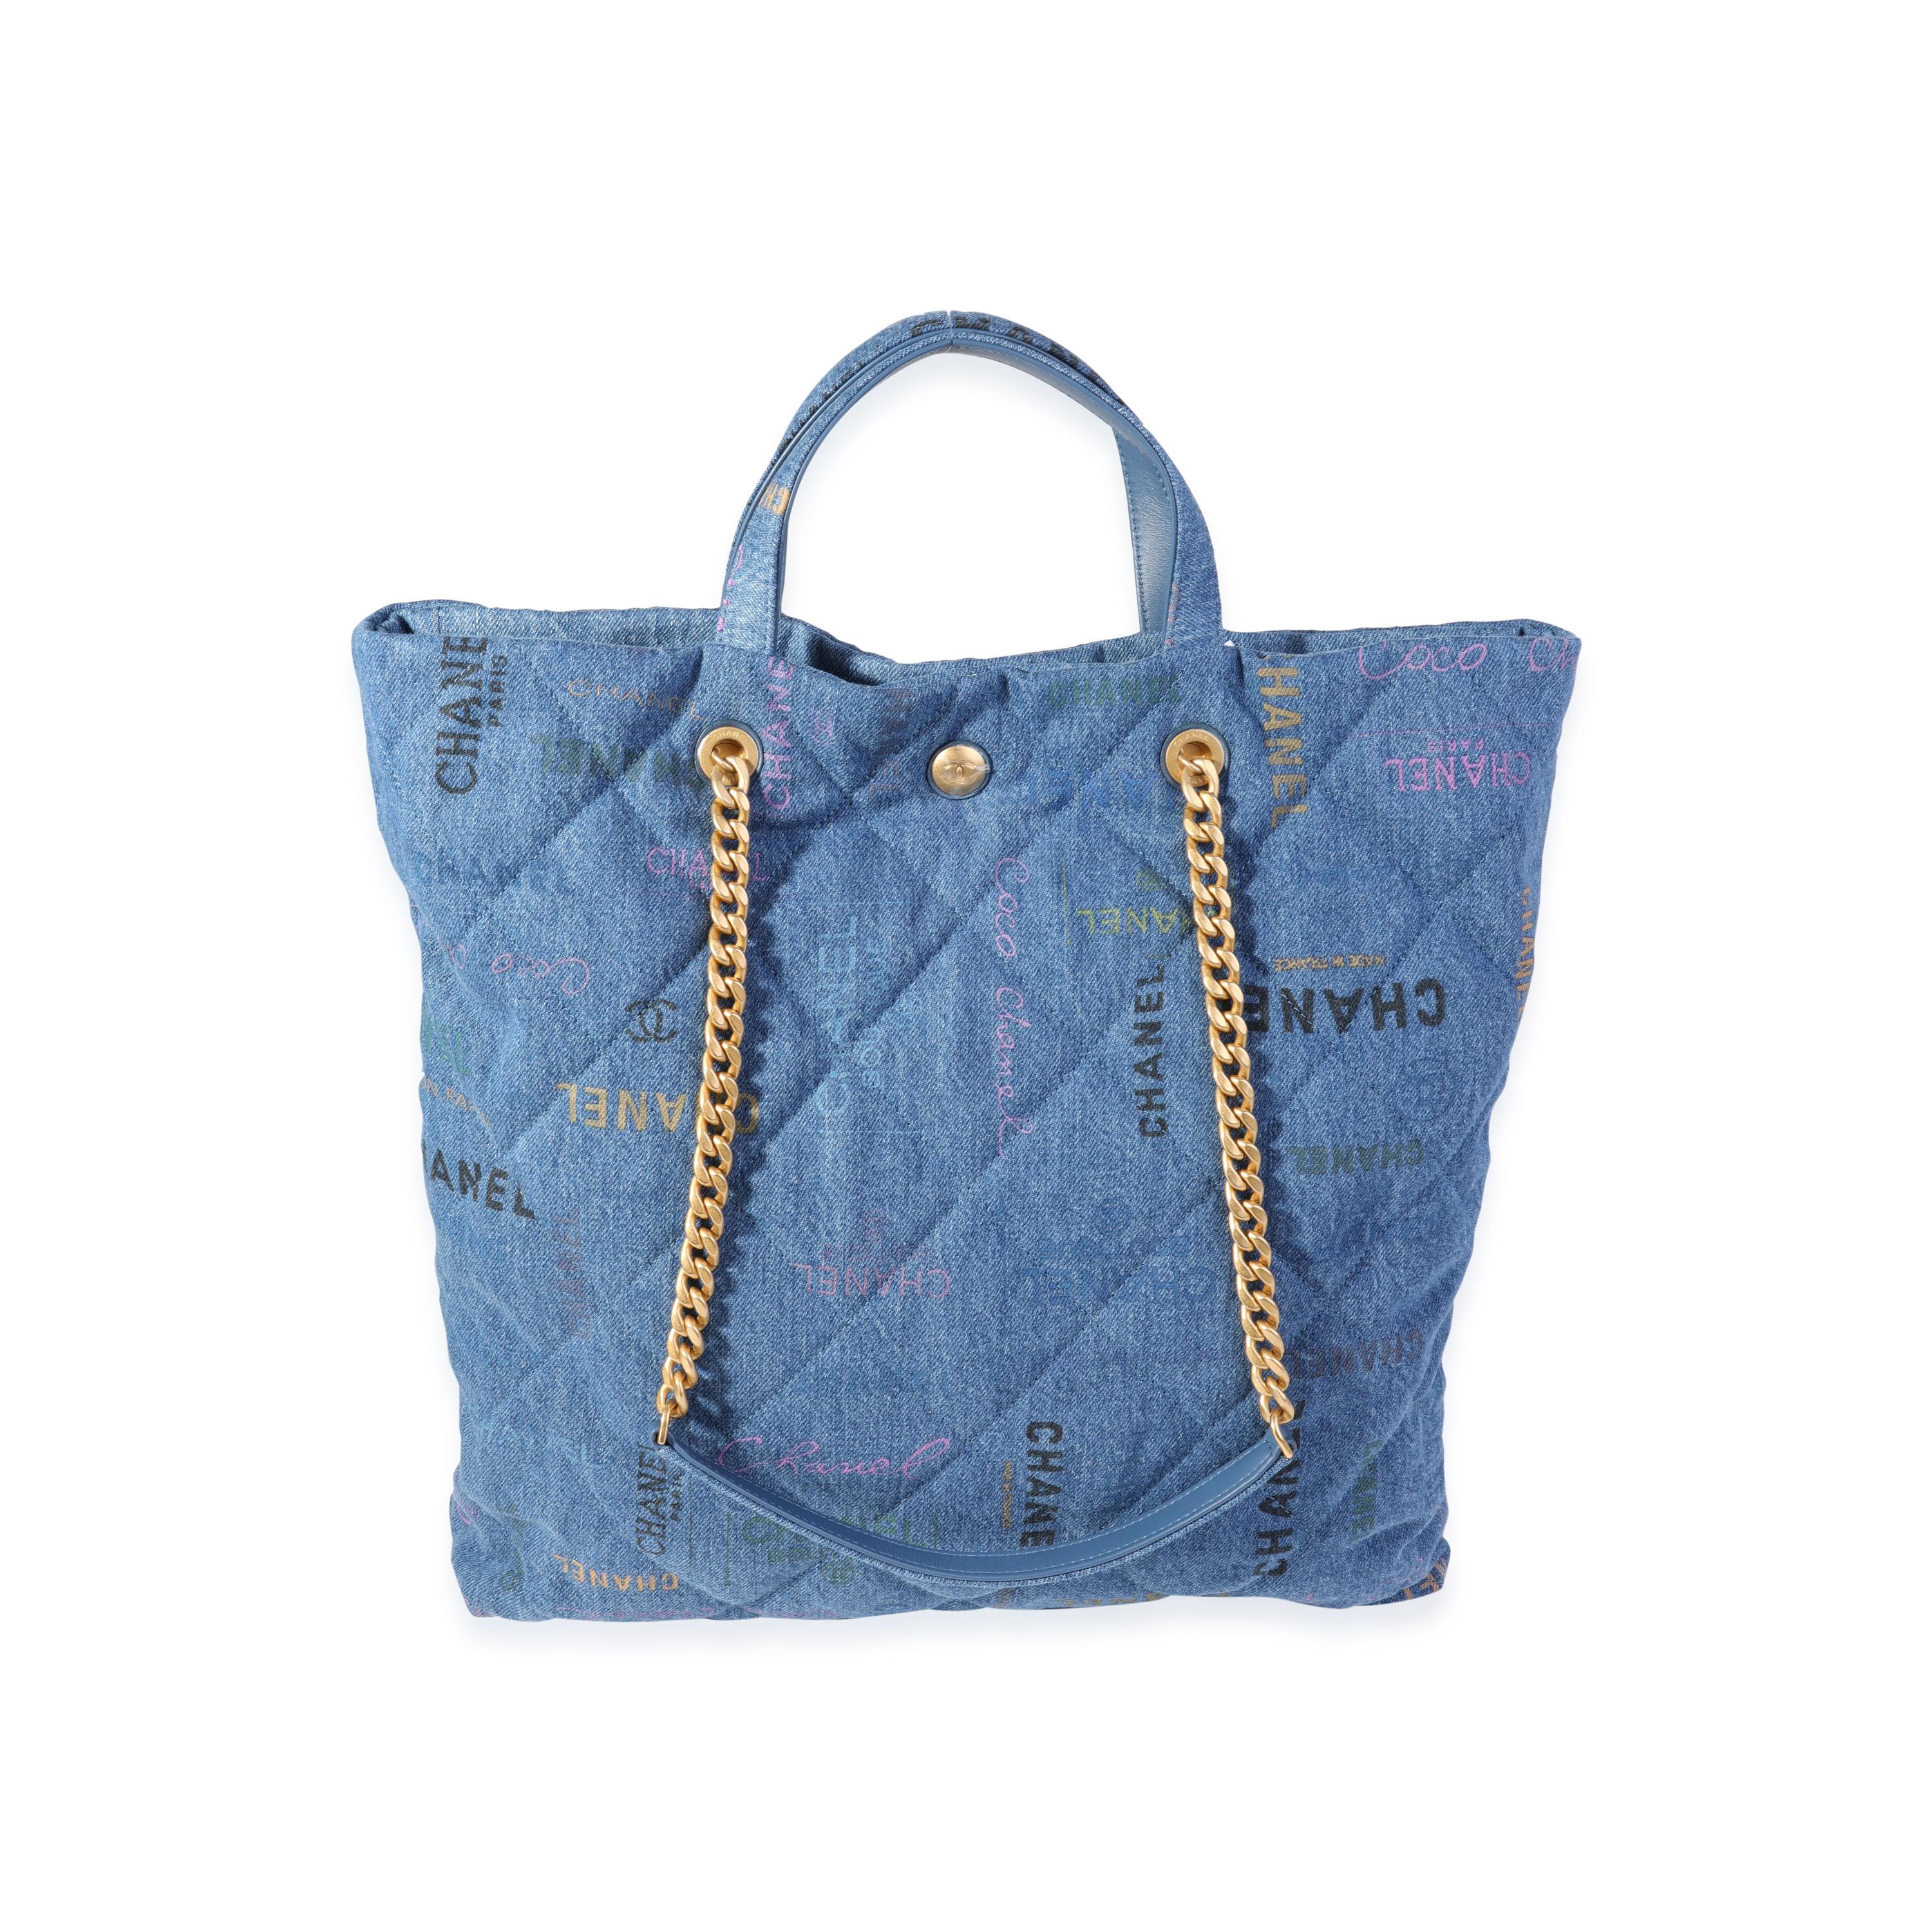 Listing Title: Chanel Blue & Multicolor Quilted Denim Mood Shopping Tote
SKU: 120363
MSRP: 4600.00
Condition: Pre-owned (3000)
Handbag Condition: Mint
Condition Comments: Mint Condition.  Final sale.
Brand: Chanel
Model: Denim Mood Shopping